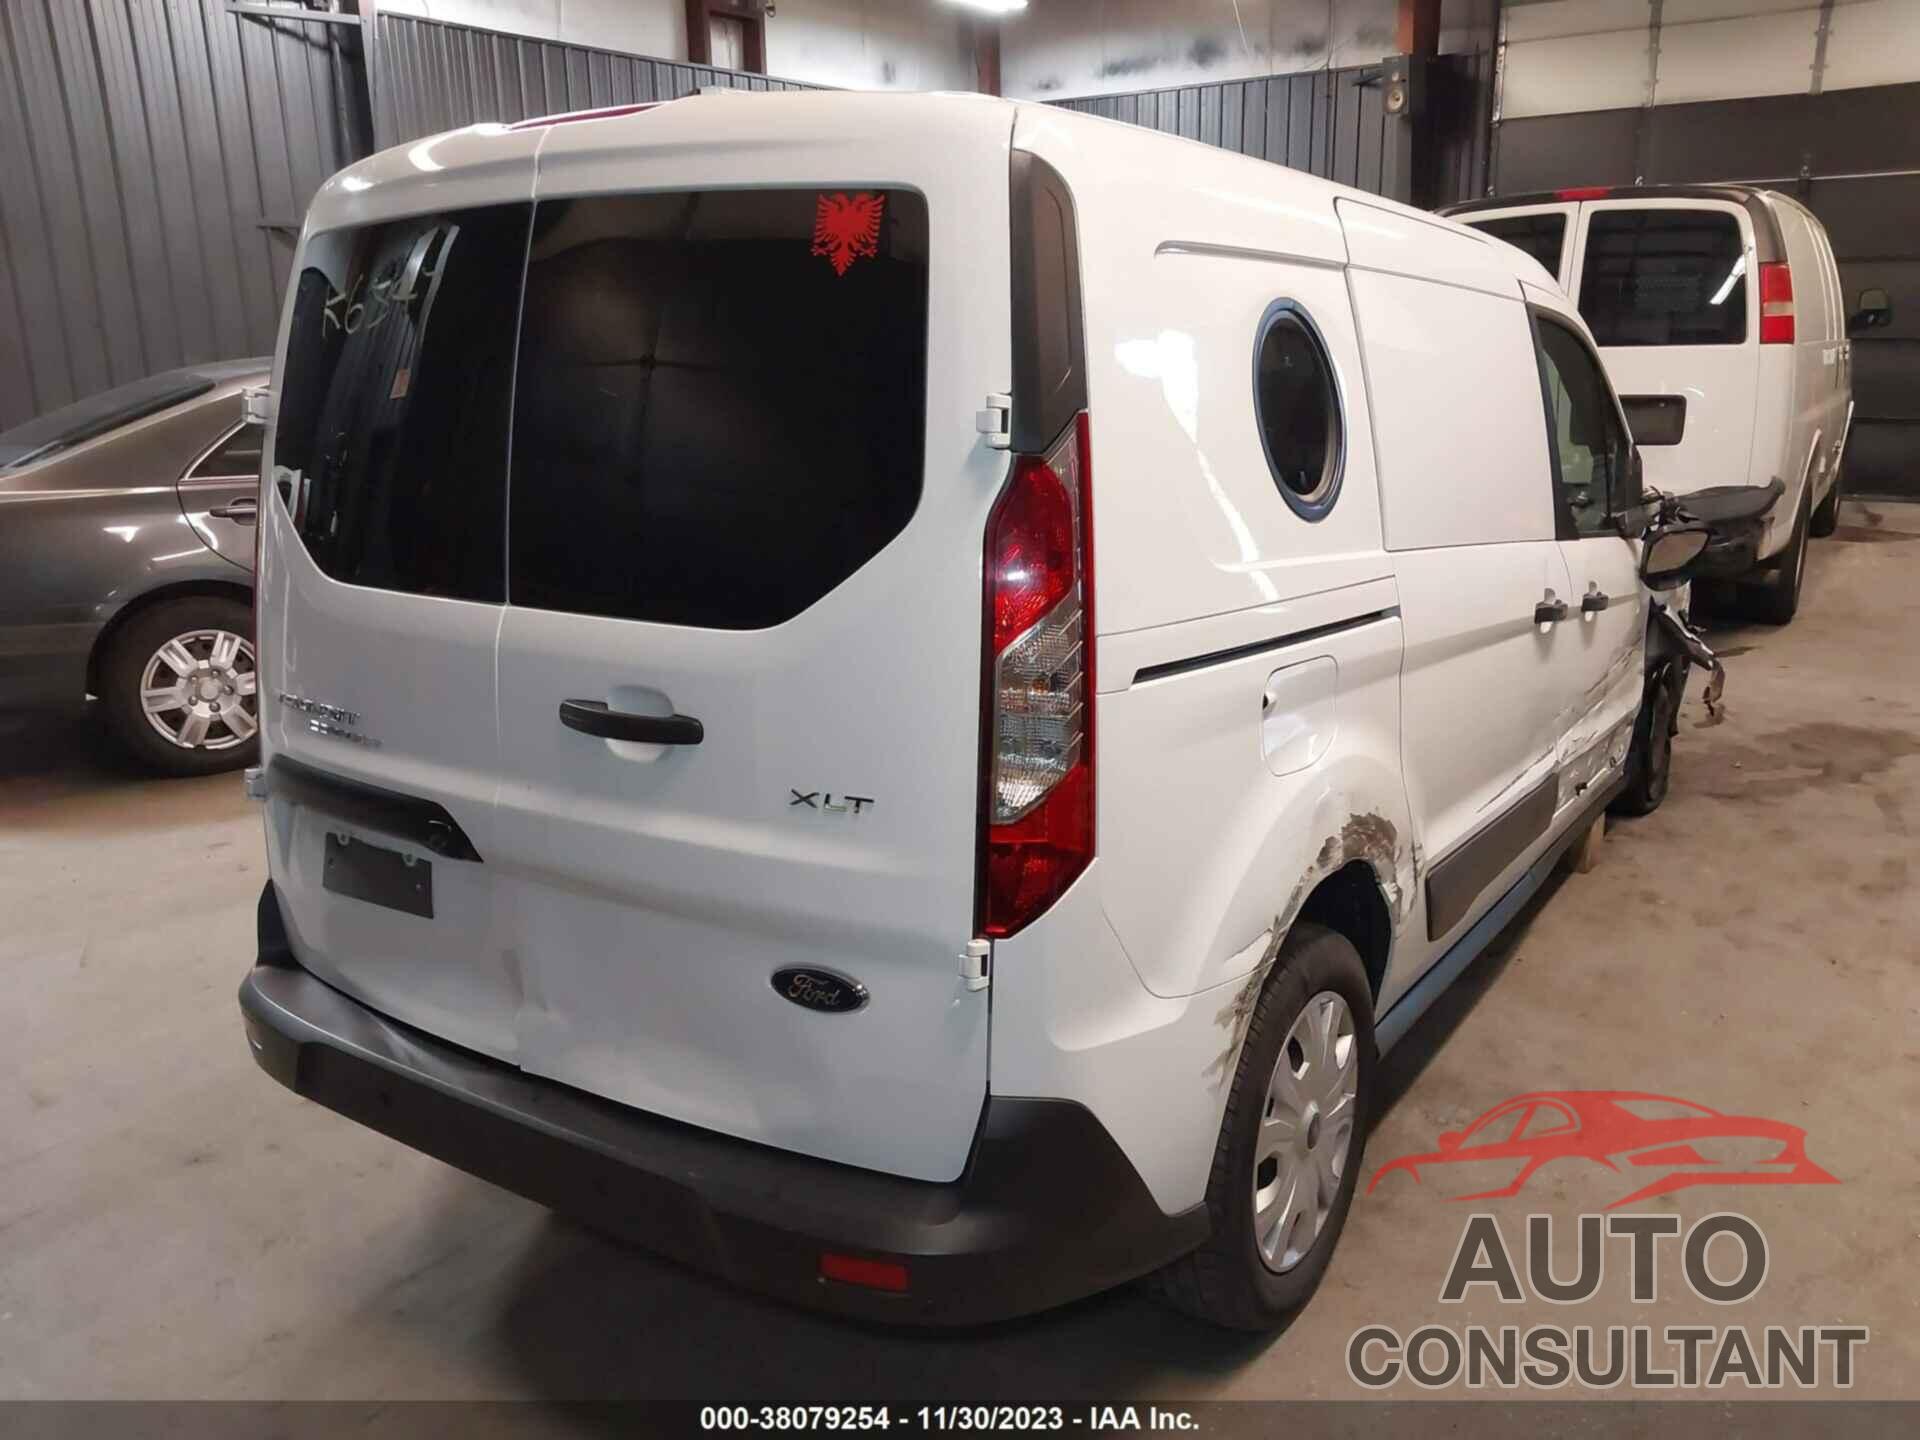 FORD TRANSIT CONNECT 2021 - NM0LS7F26M1491065